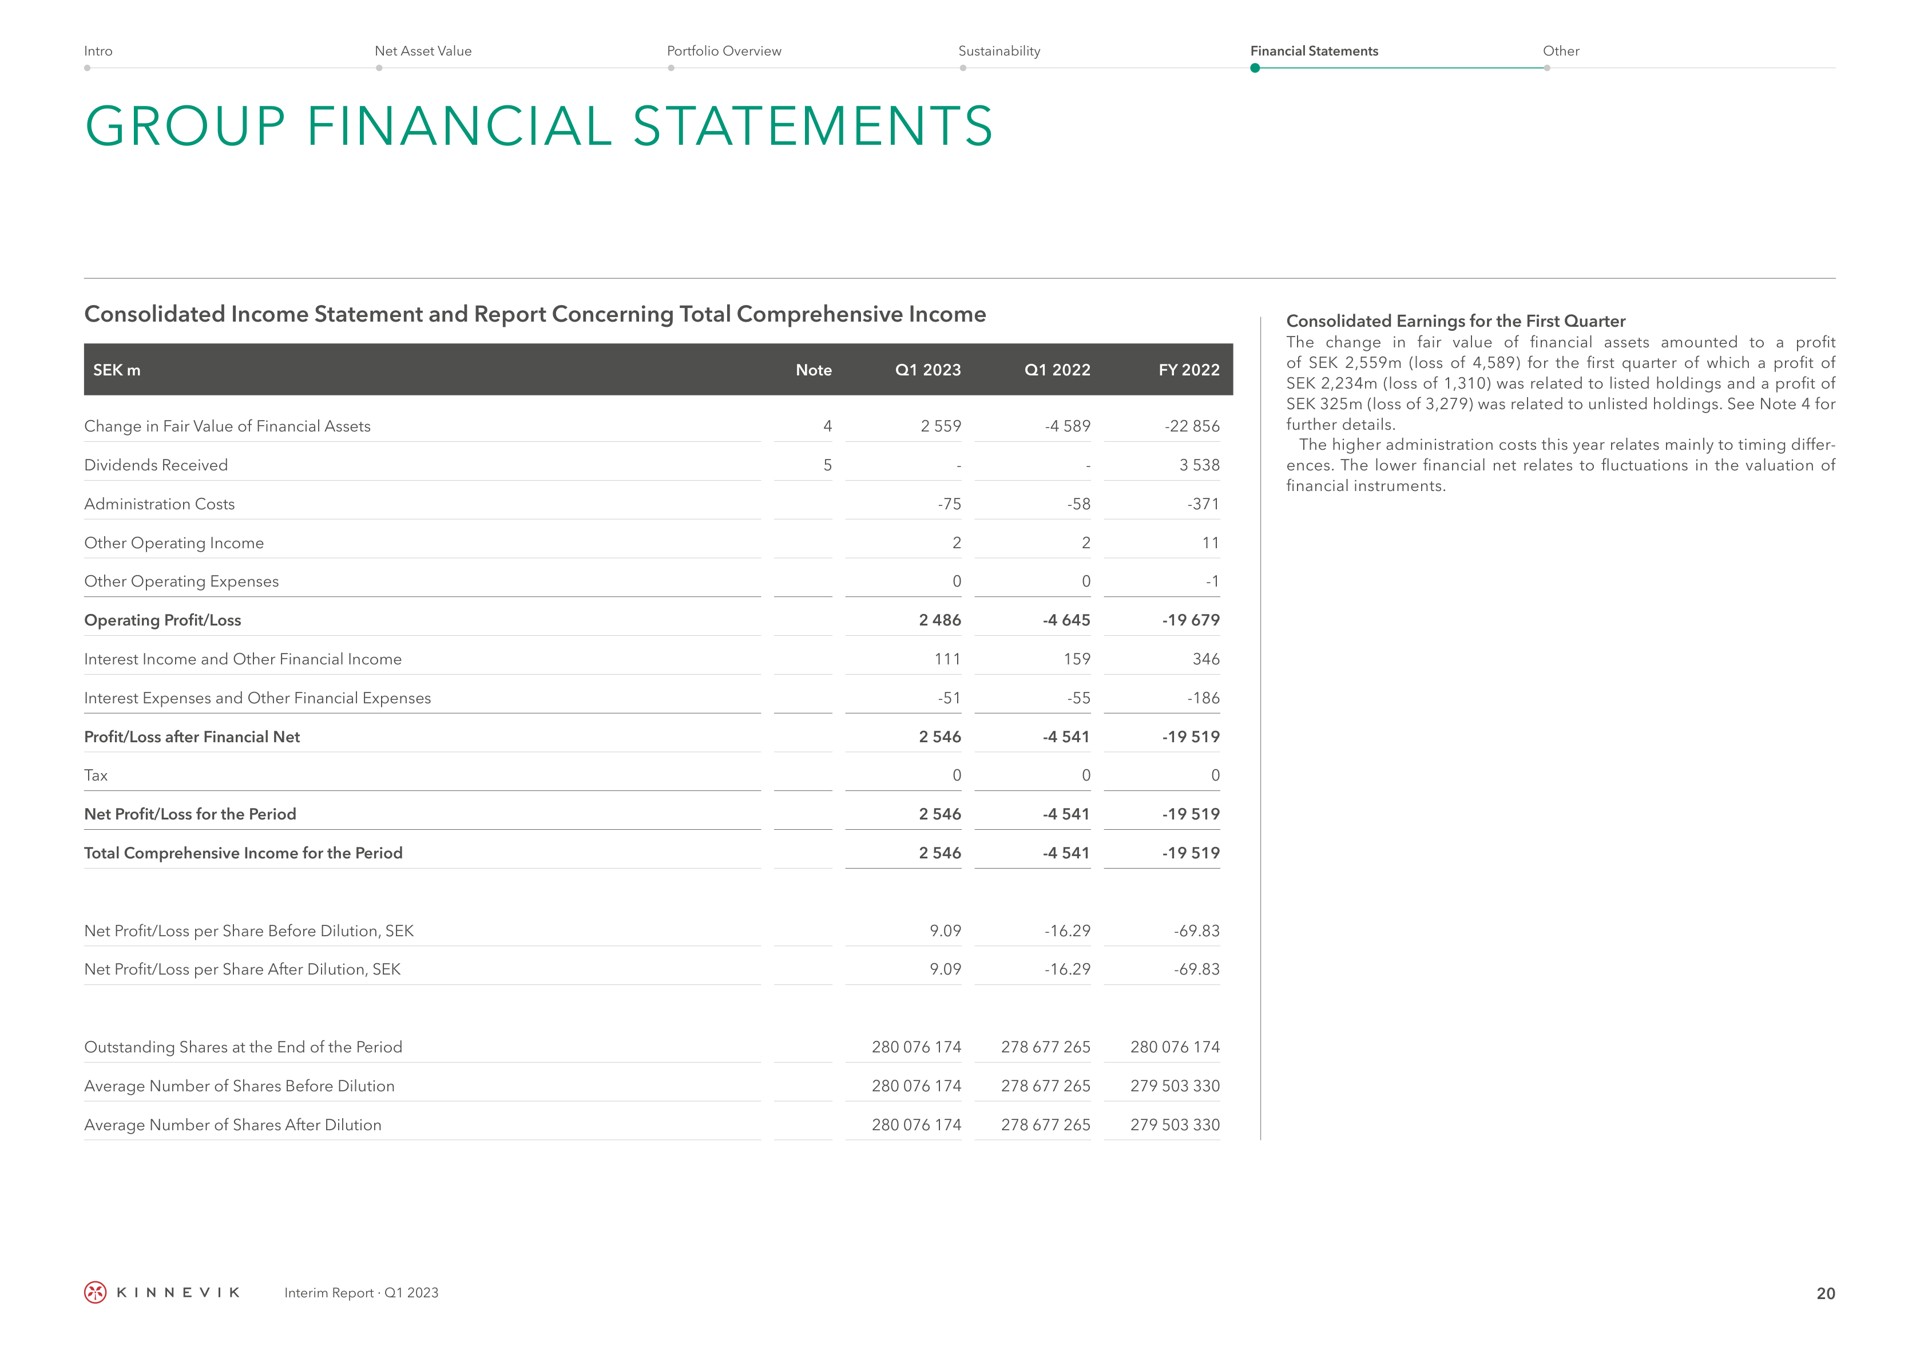 group financial statements consolidated earnings for the first quarter consolidated income statement and report concerning total comprehensive income interim | Kinnevik